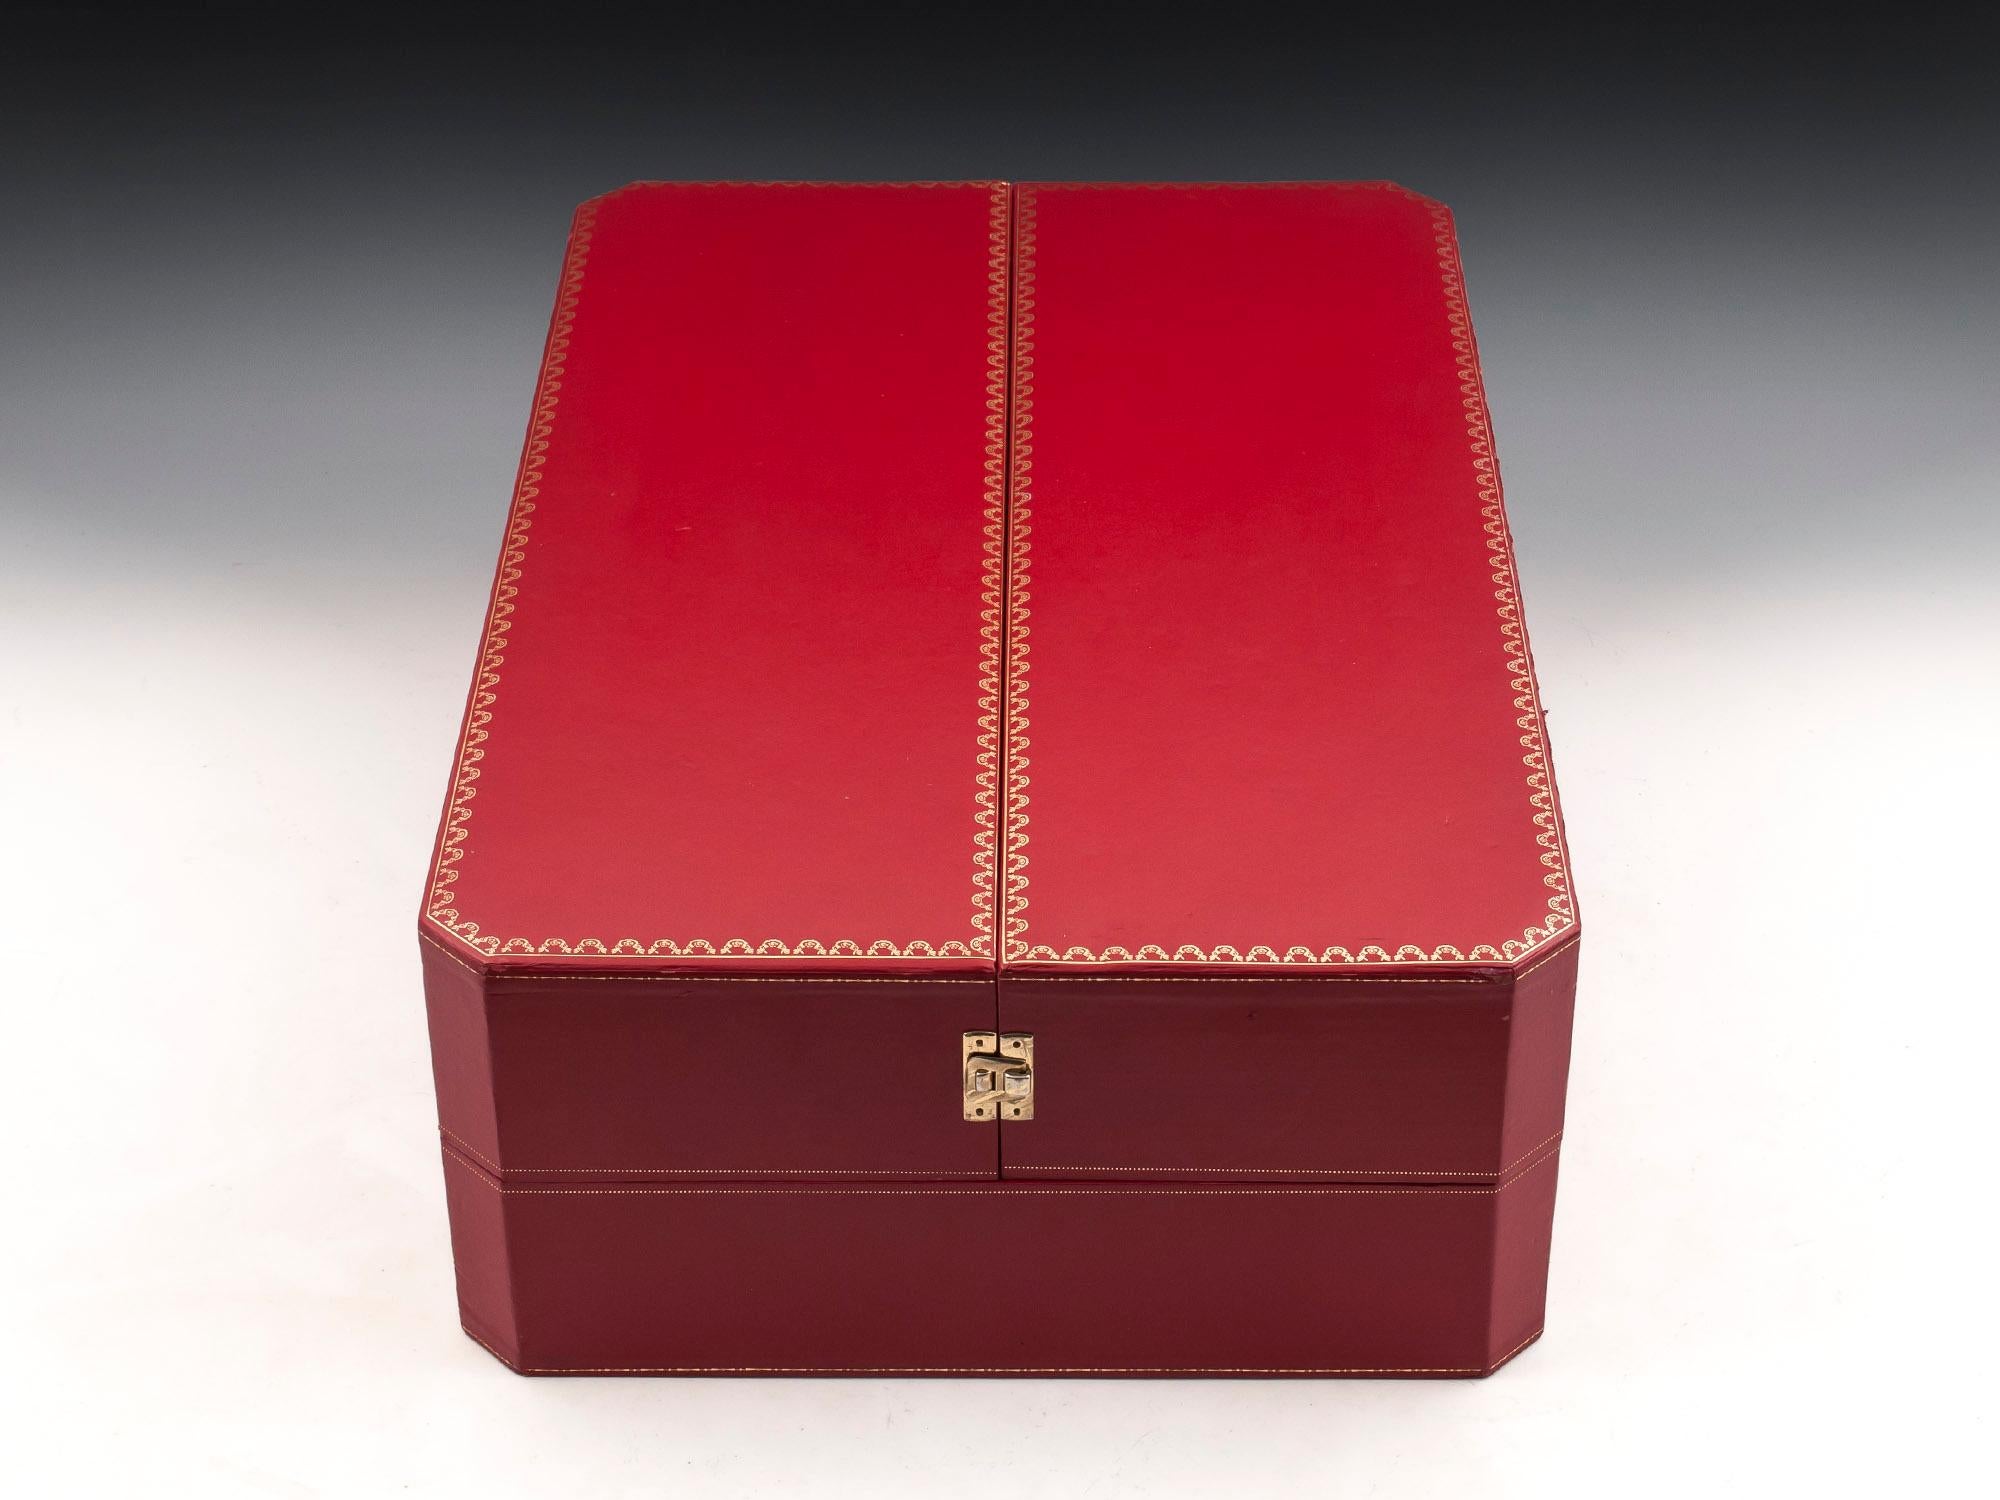 Large red leather bound backgammon box by Cartier with fine gold detailing and two brass clasps either side to keep the box secure when closed. 

Opening this fabulous Cartier games box reveals a large vibrant red and white backgammon board, flanked